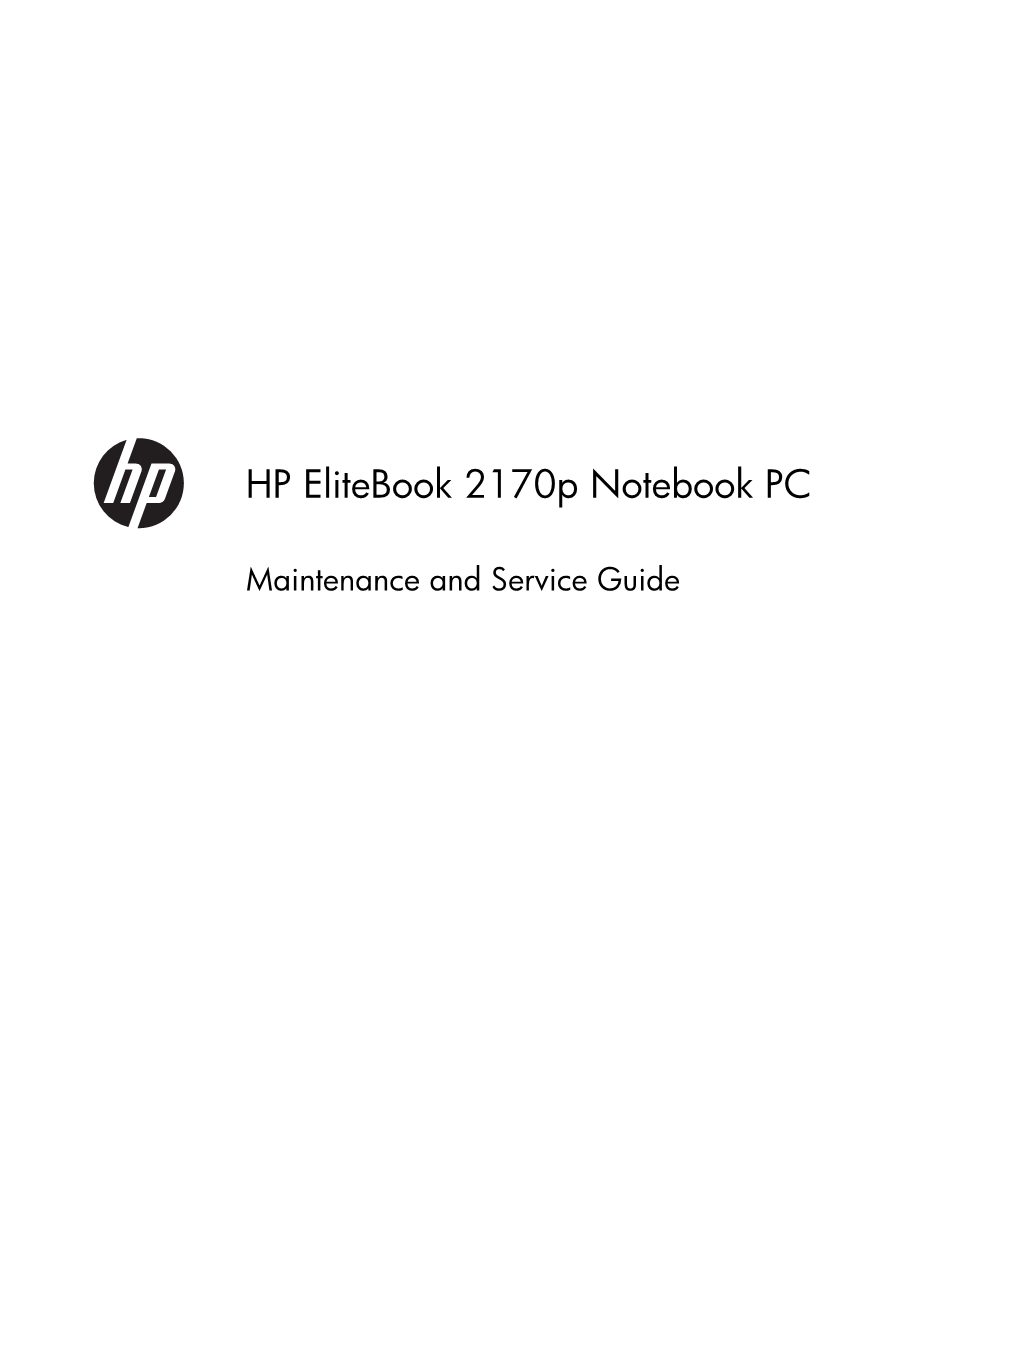 HP Elitebook 2170P Notebook PC Maintenance and Service Guide